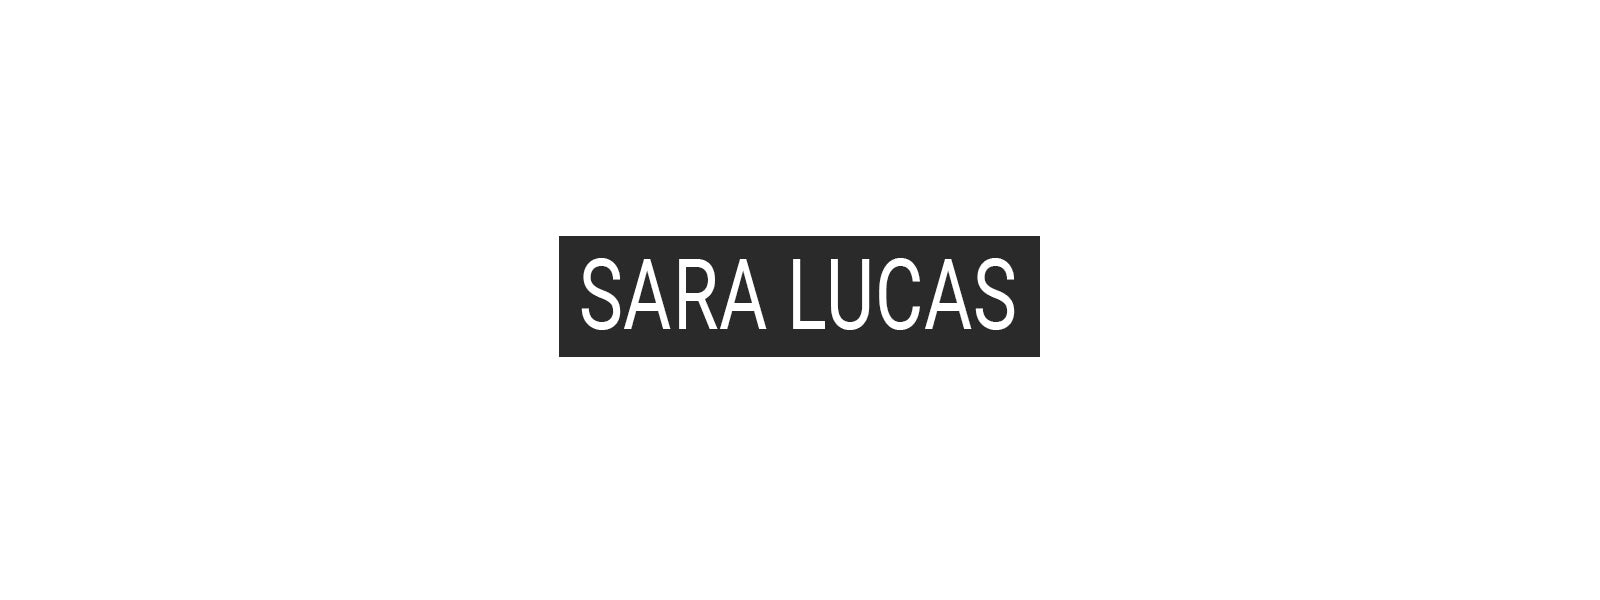 Sara Lucas – Inspiring Nuggets About Changing Your life